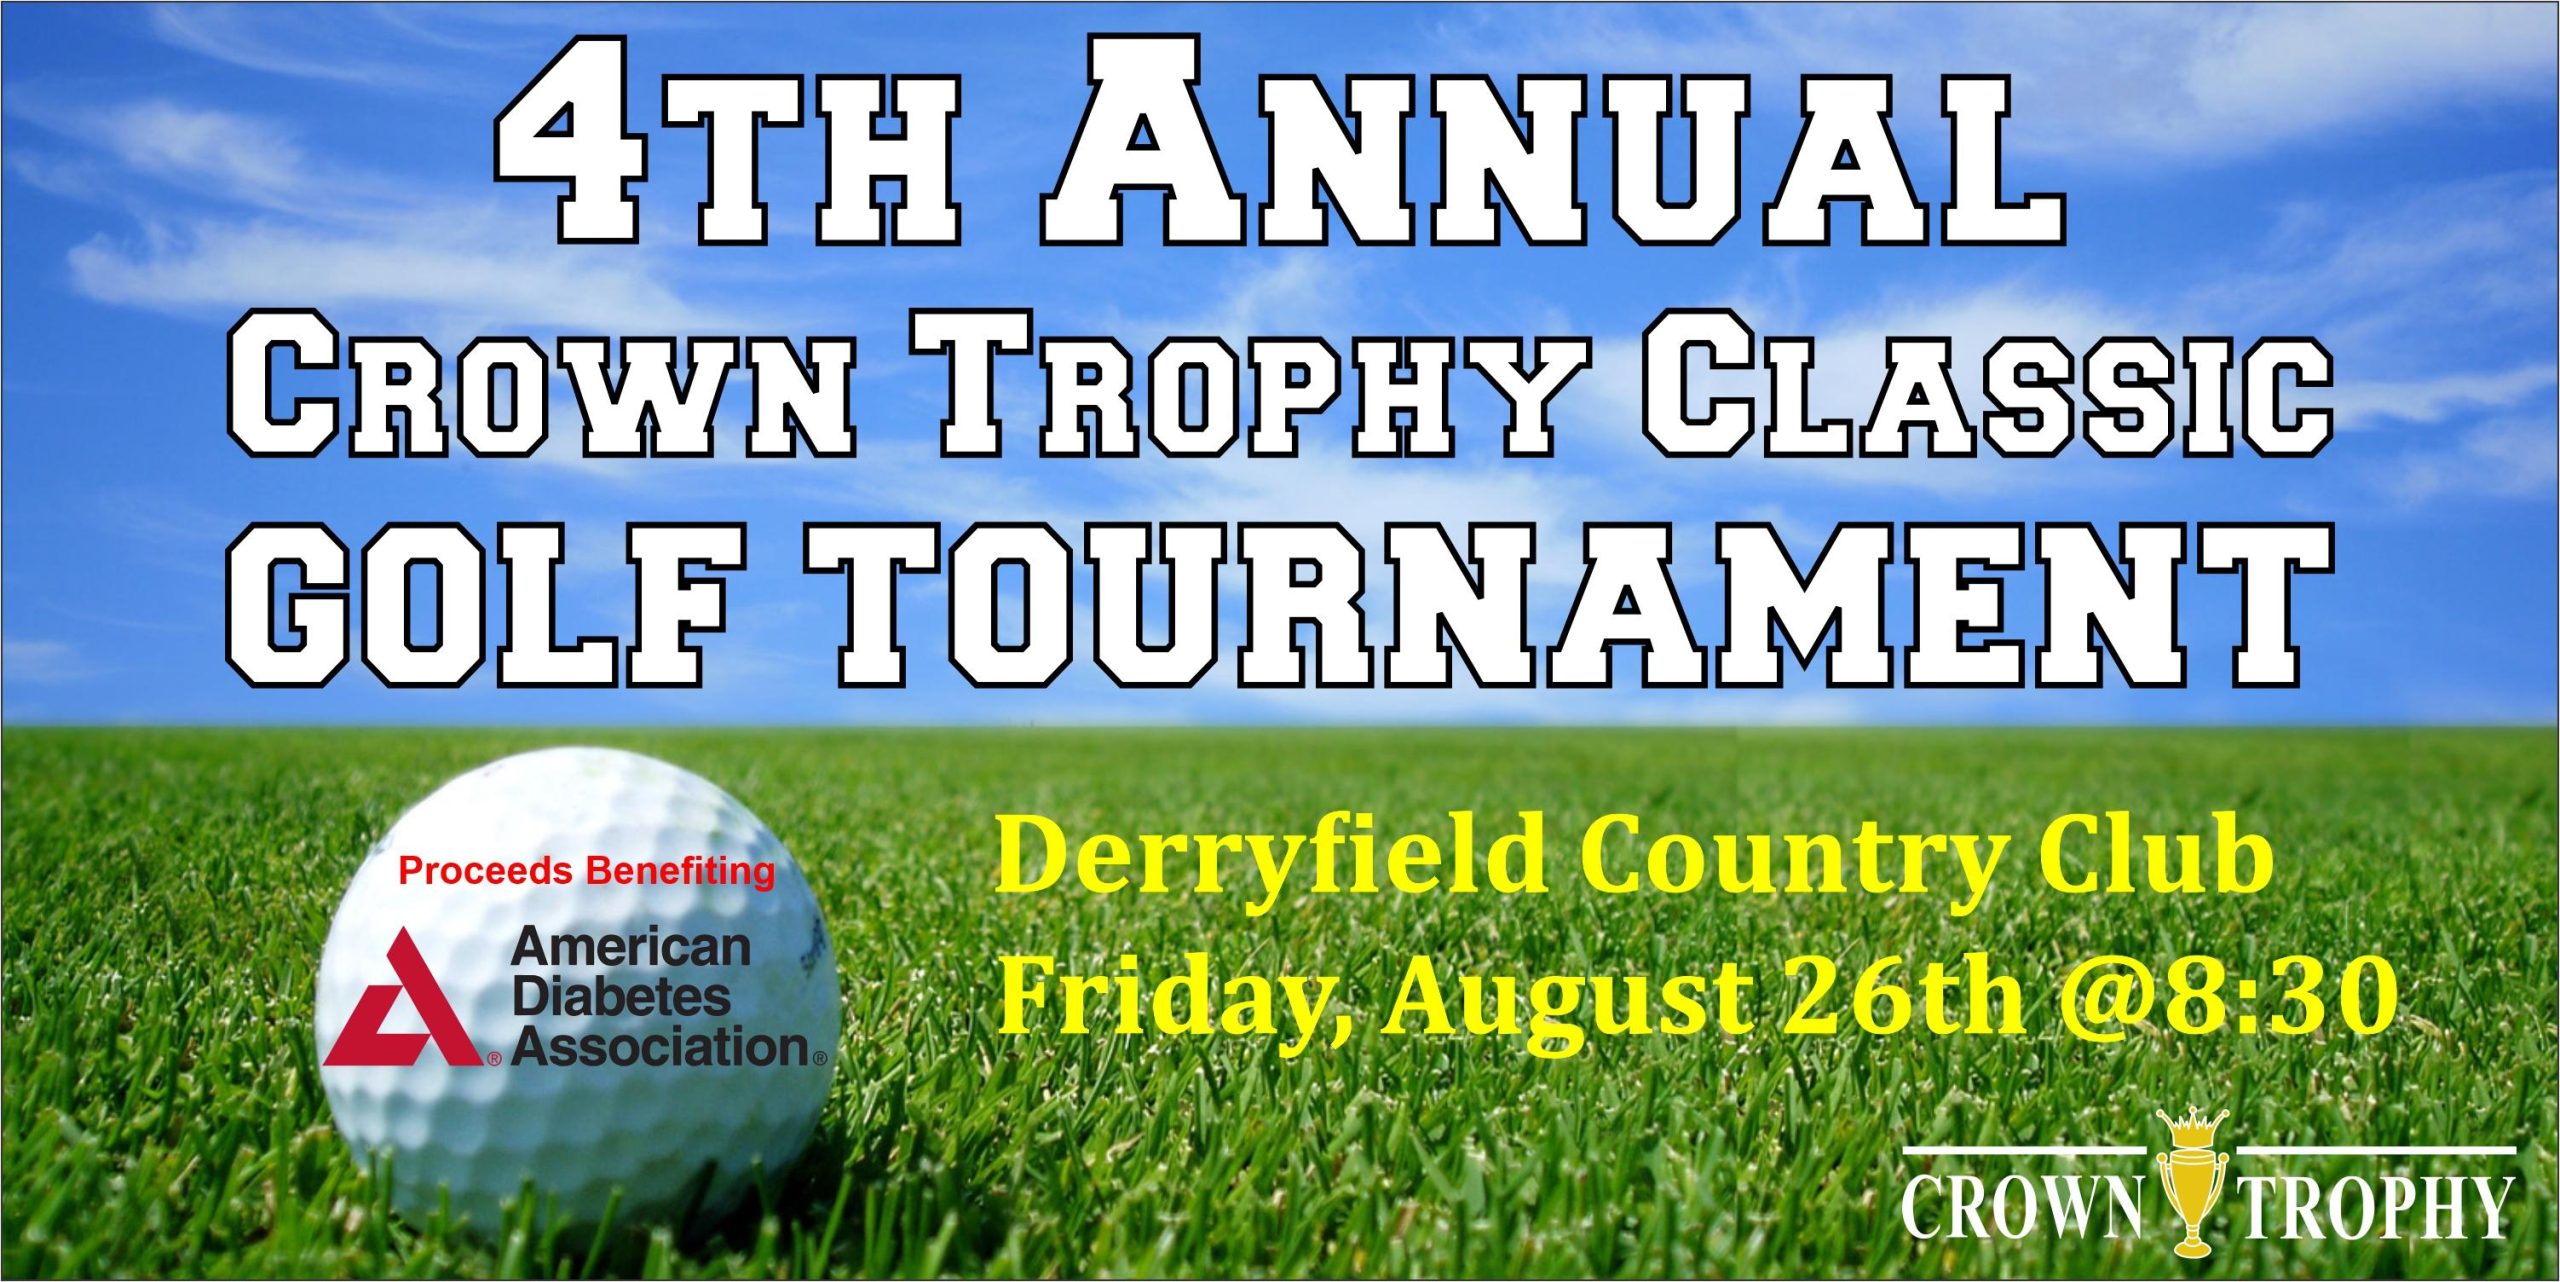 4th Annual Crown Trophy Classic Golf Tournament